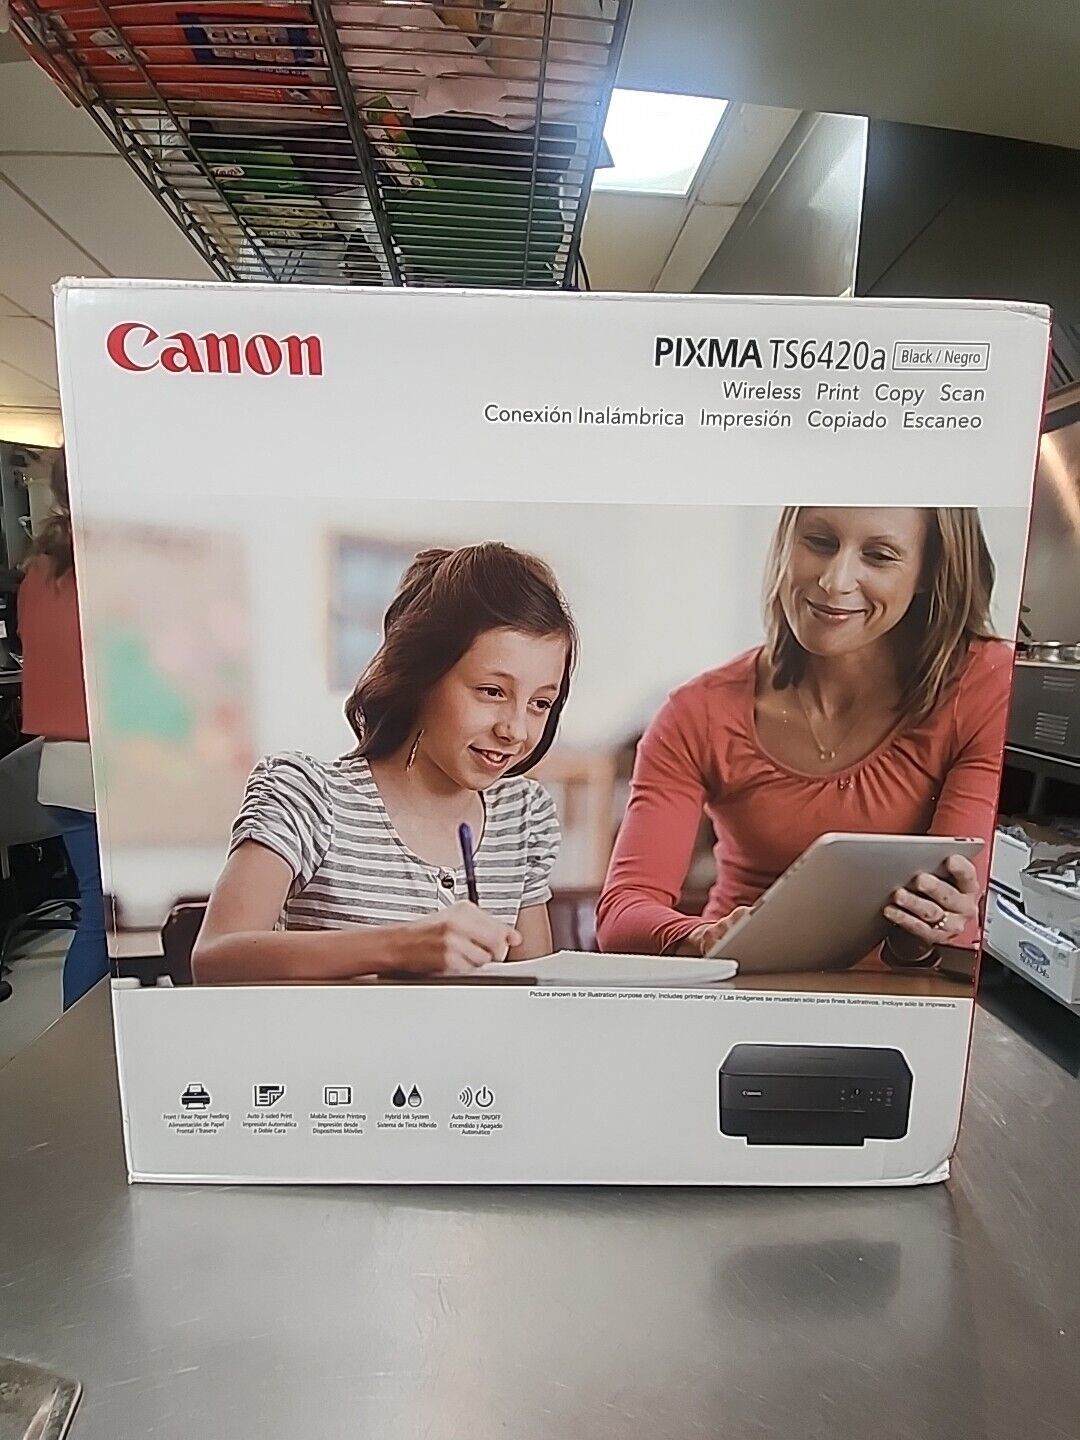 Canon PIXMA TS6420a Wireless All-In-One Inkjet Printer - Black Working Great